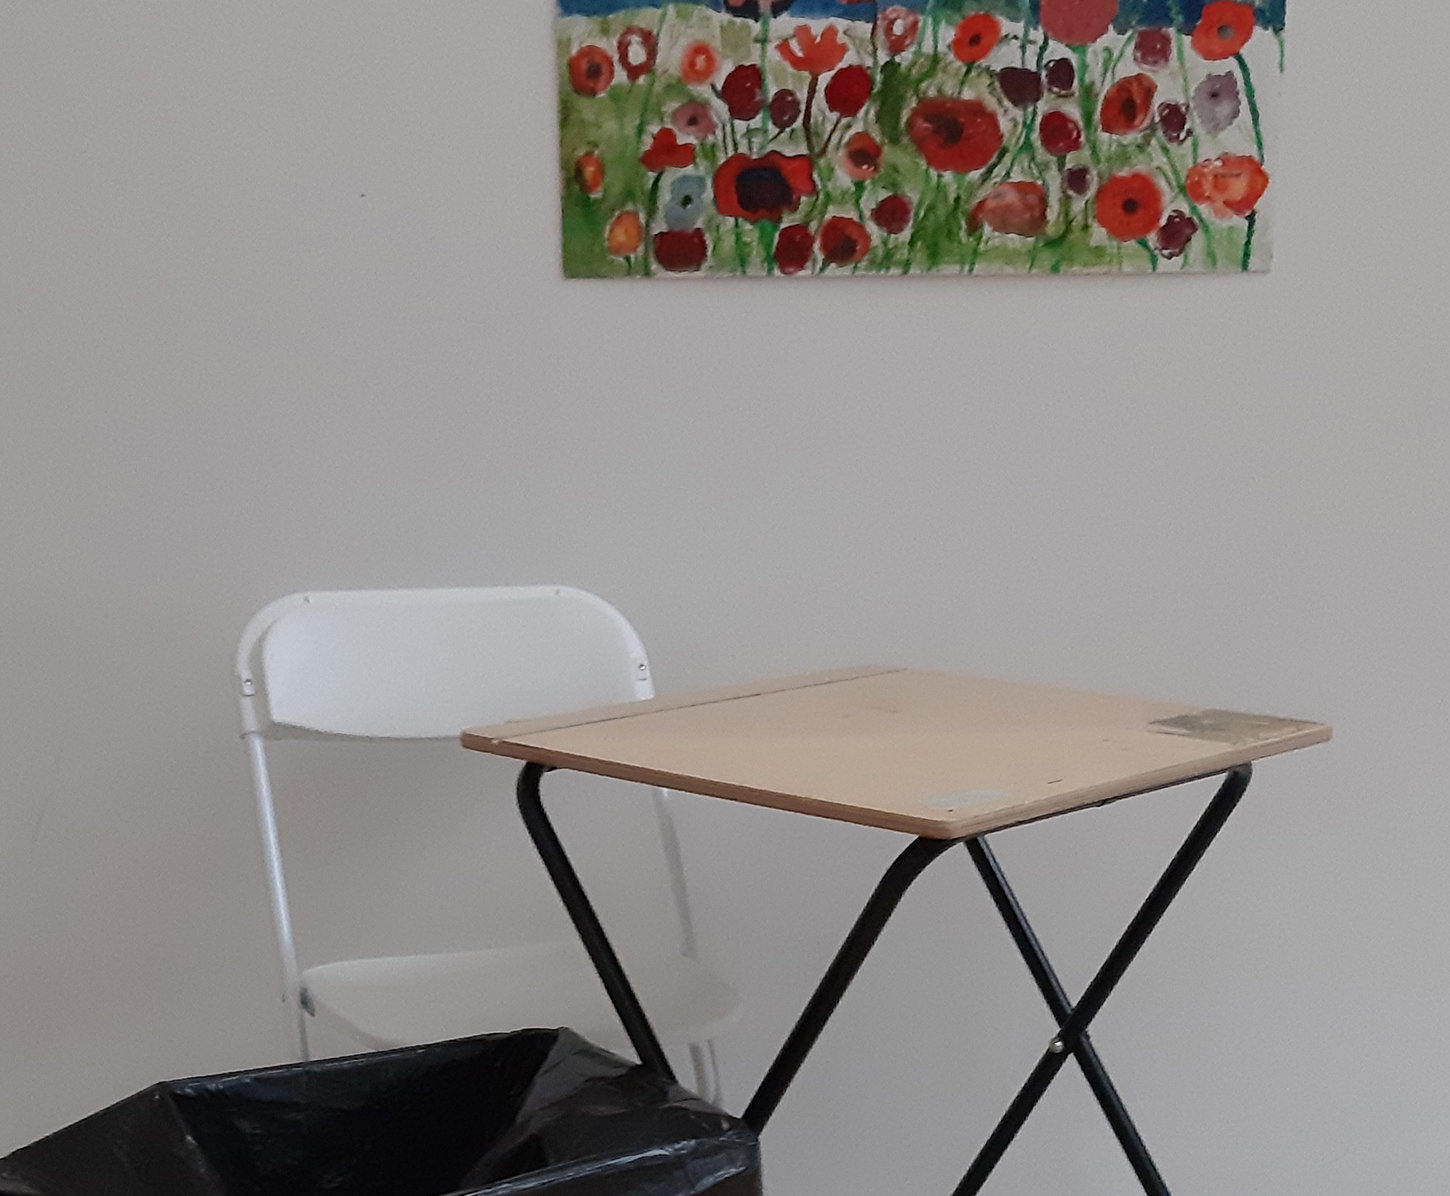 An example of a bad photo of an artwork. The painting is in the background and there is furniture blocking the view.